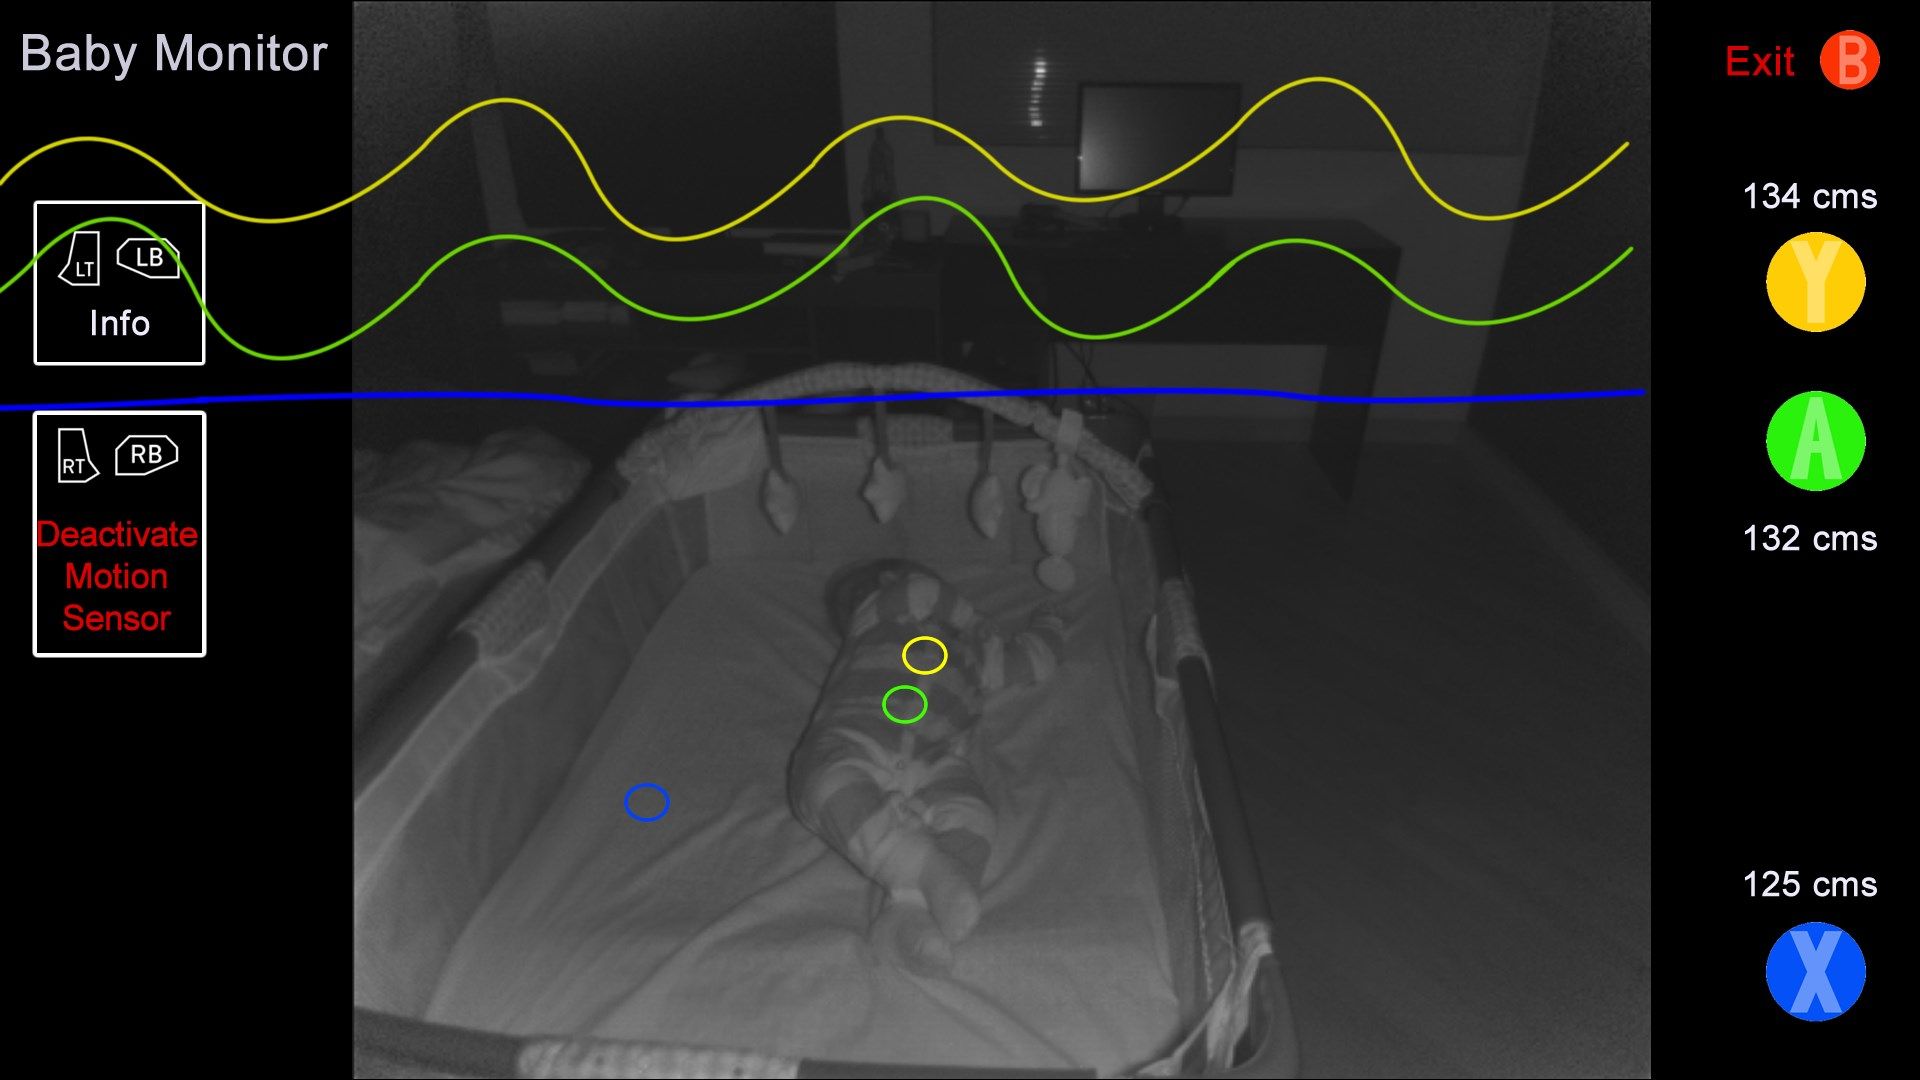 Motion Sensor Activated. Tracking Chest and Abdomen movements (This is how it looks in the Xbox One)